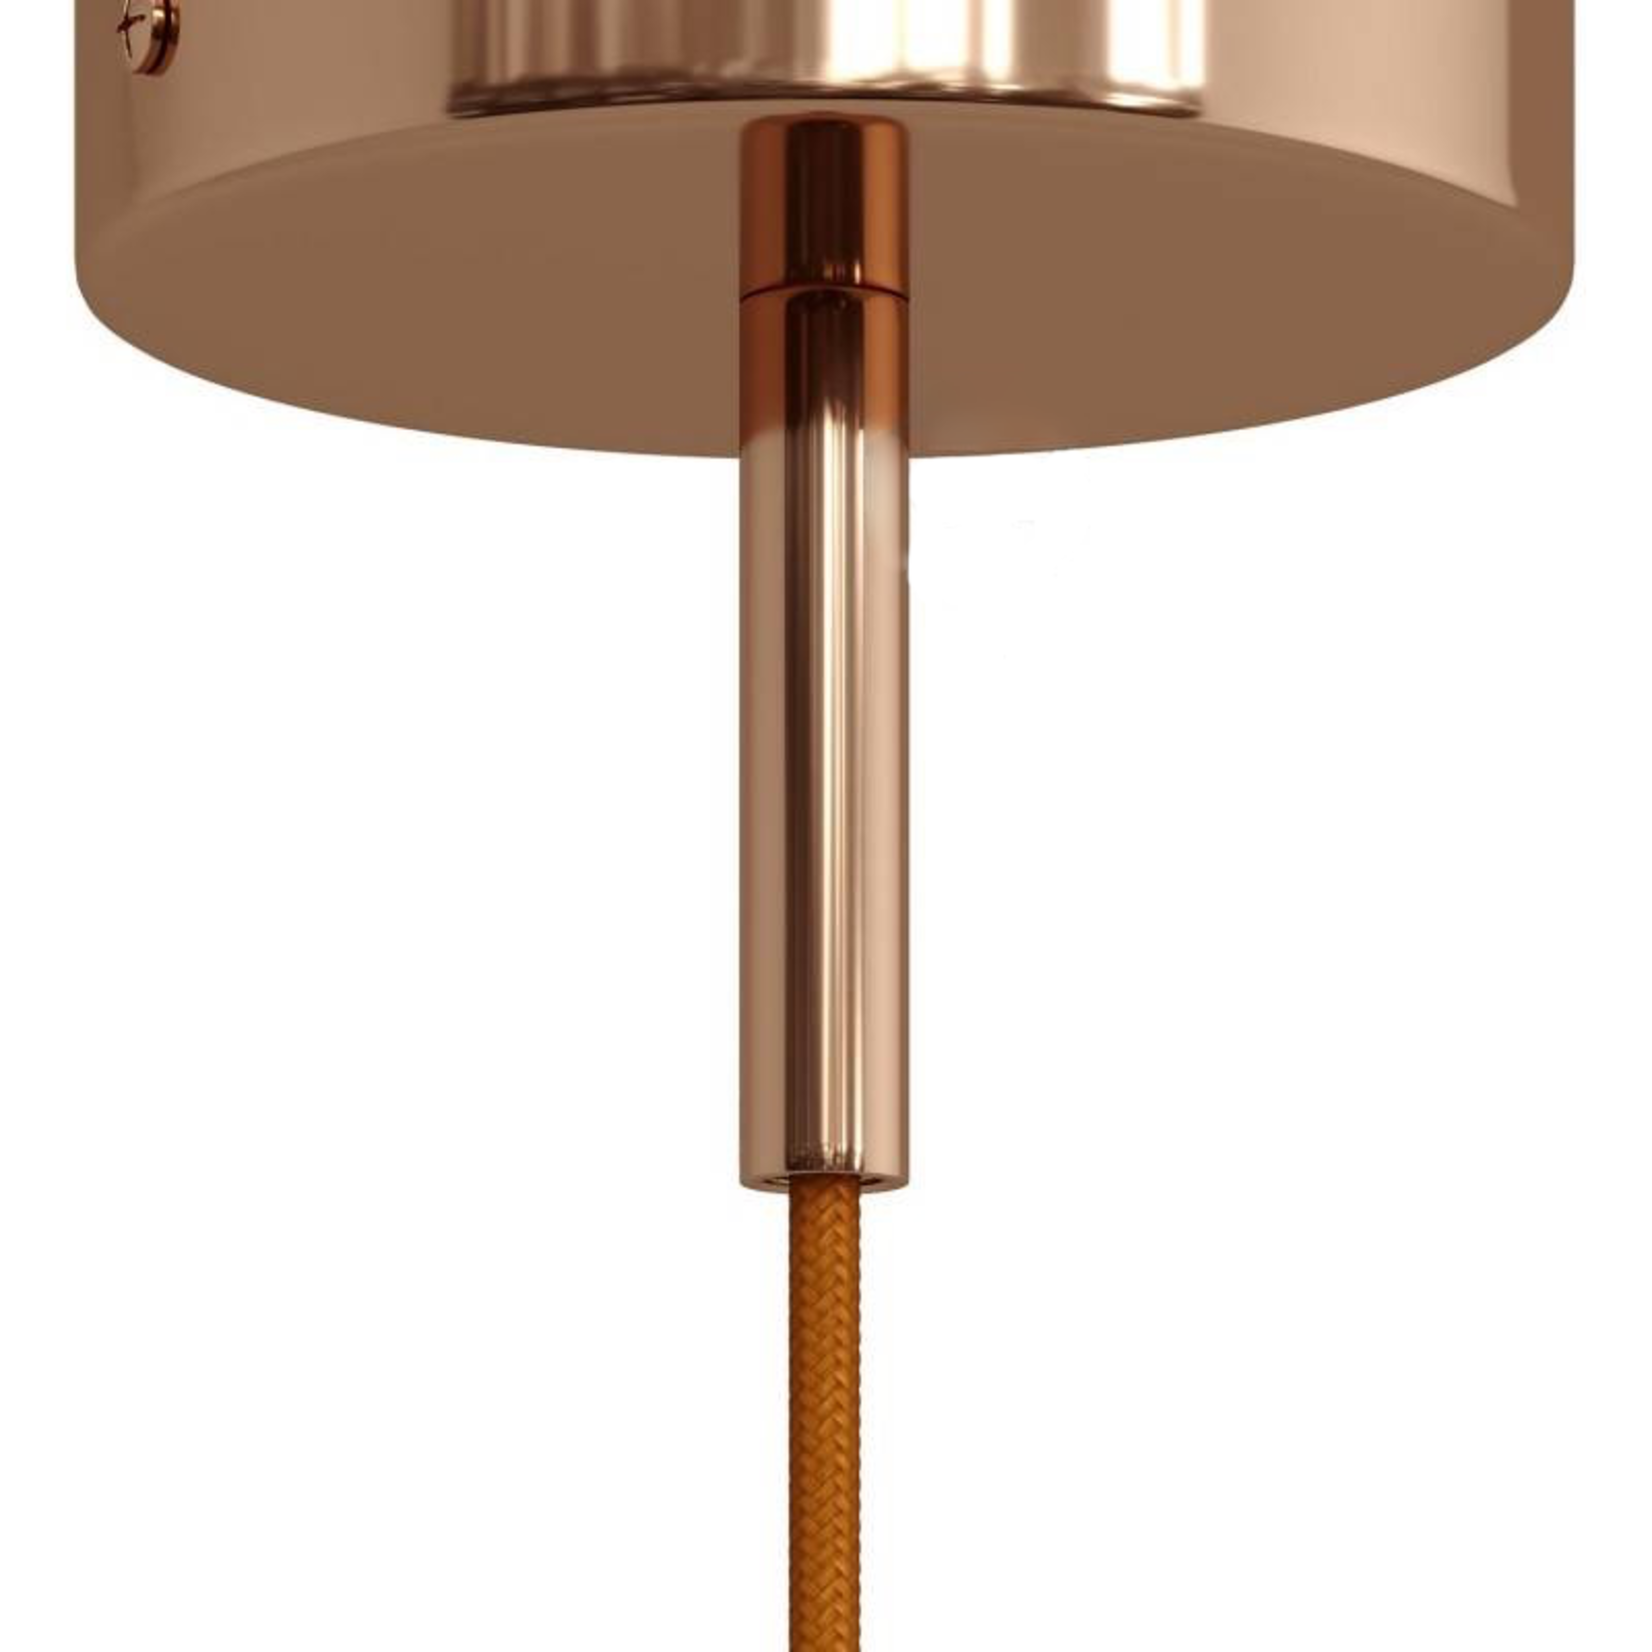 CCIT Copper finish metal round 7 cm strain relief clamp provided with threaded tube, nut and washer